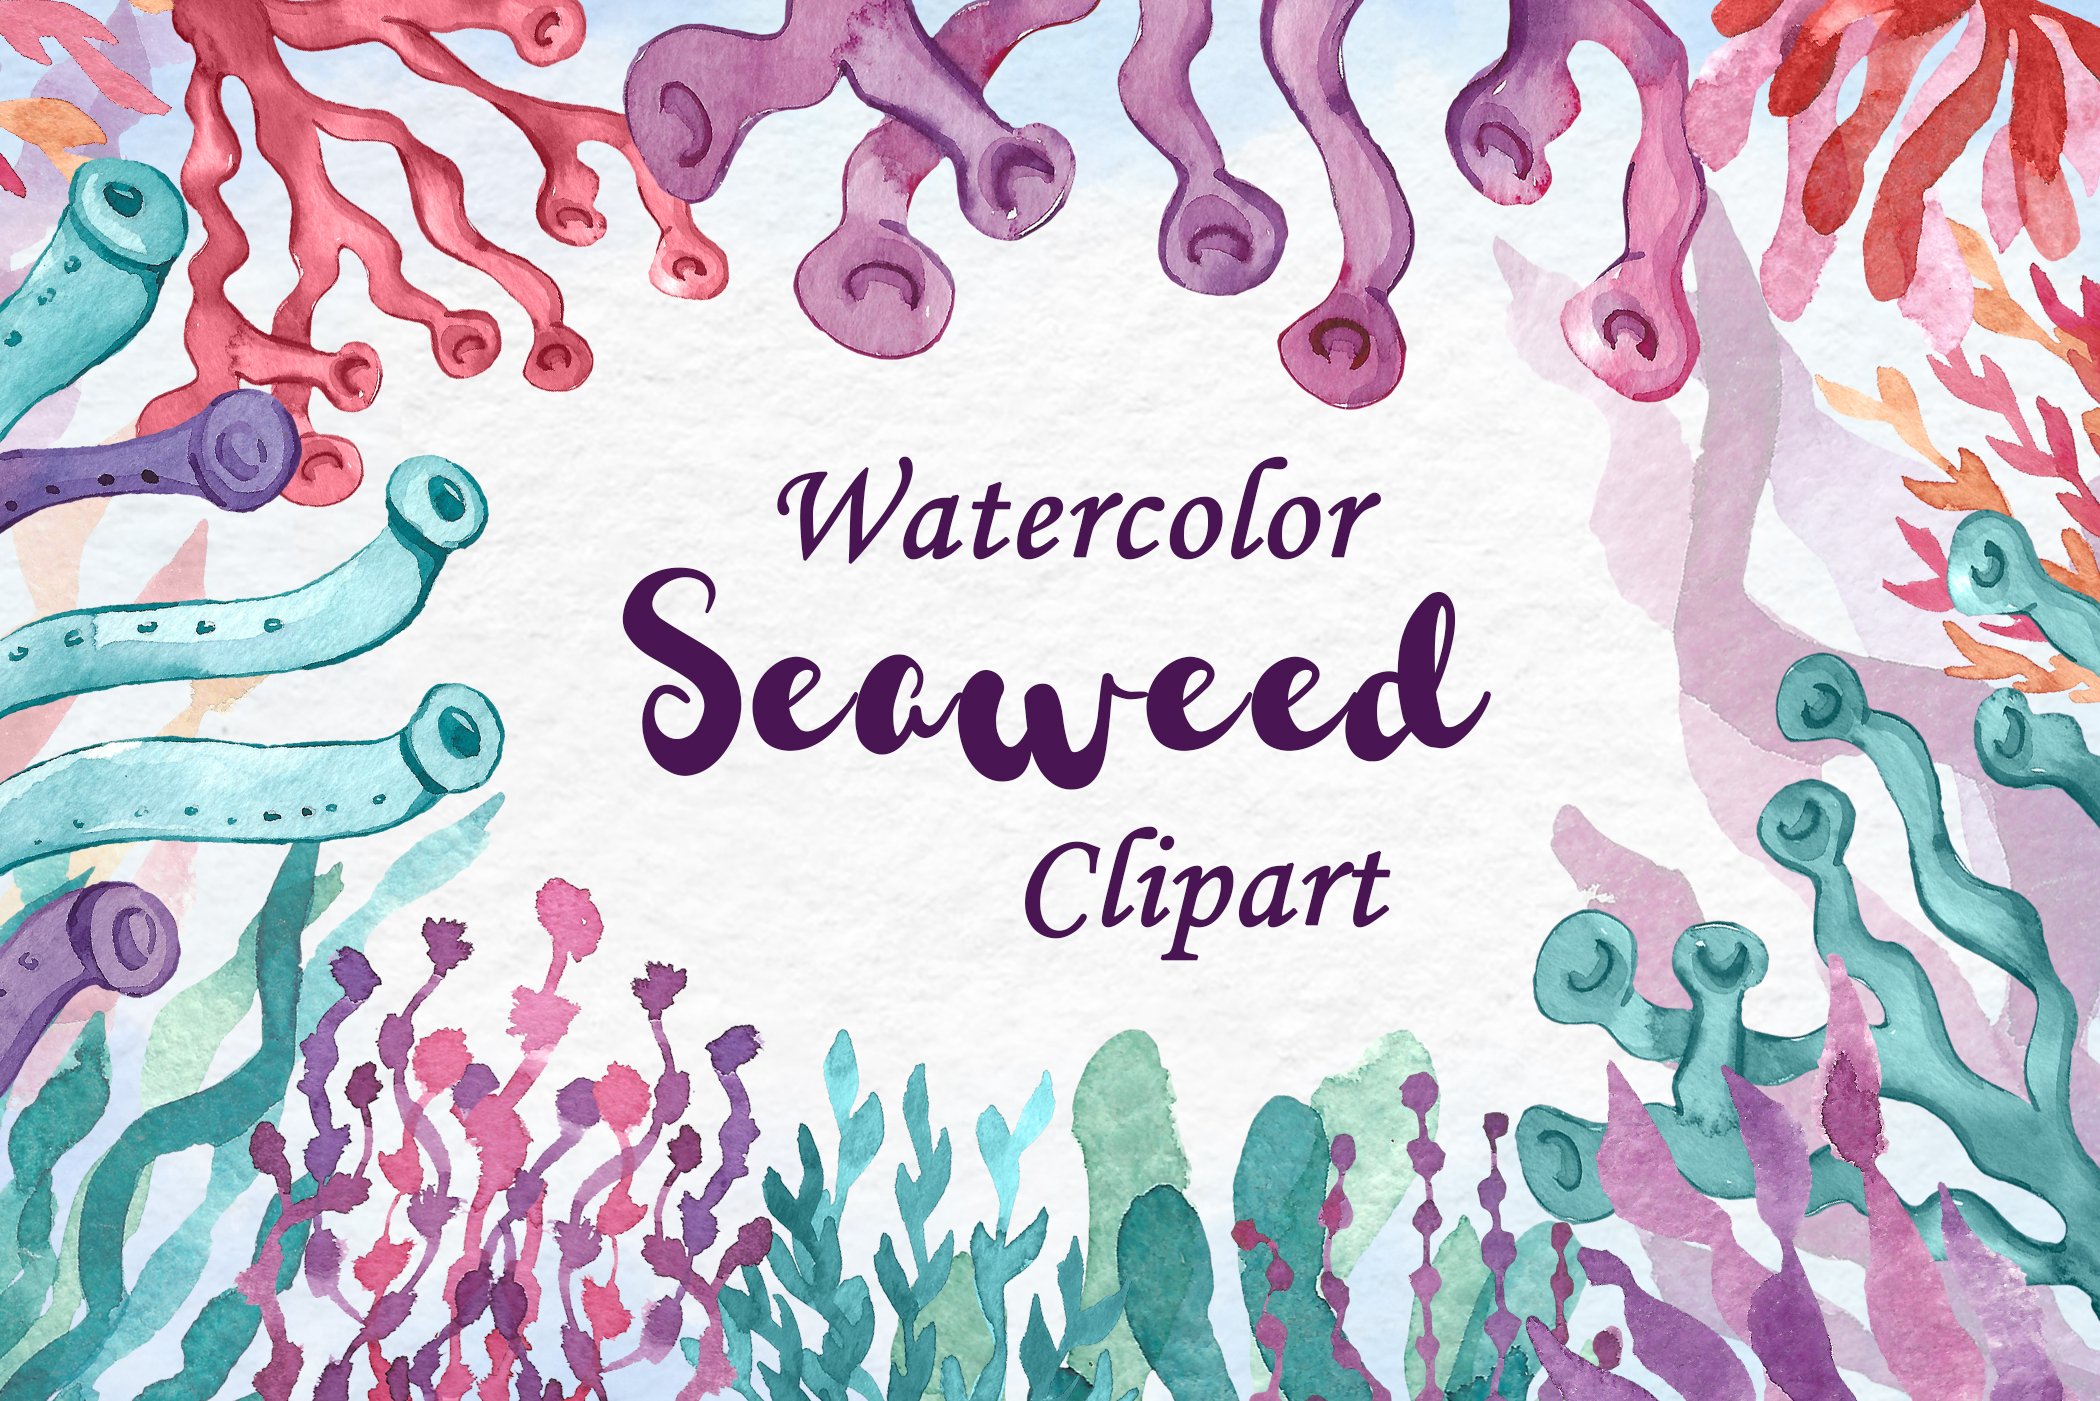 Watercolor Seaweed Clipart cover image.